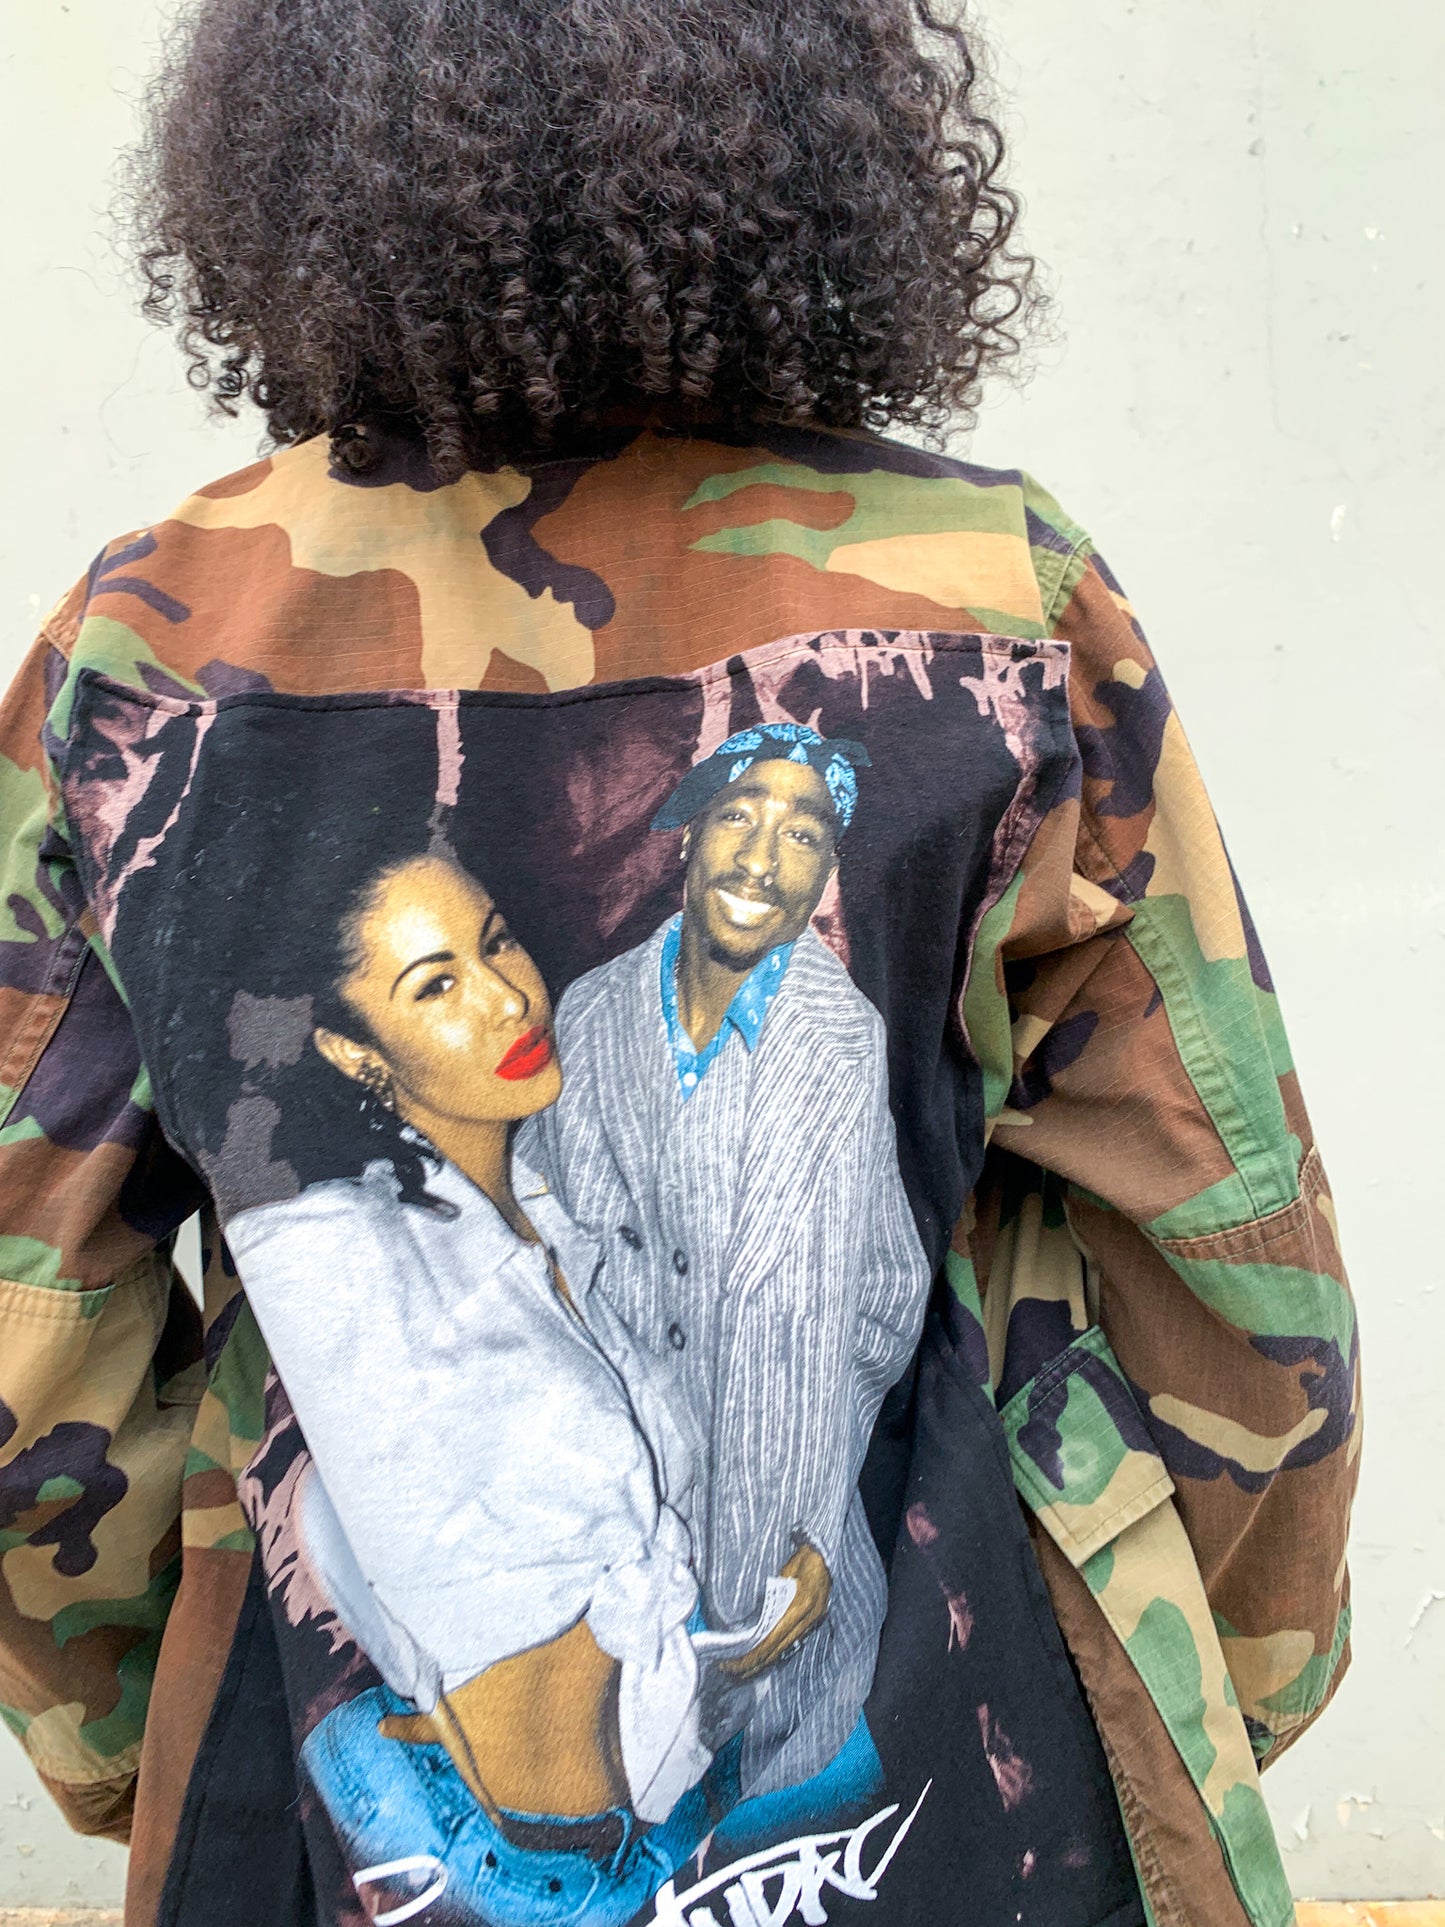 90s Inspired Camo Patch Jacket